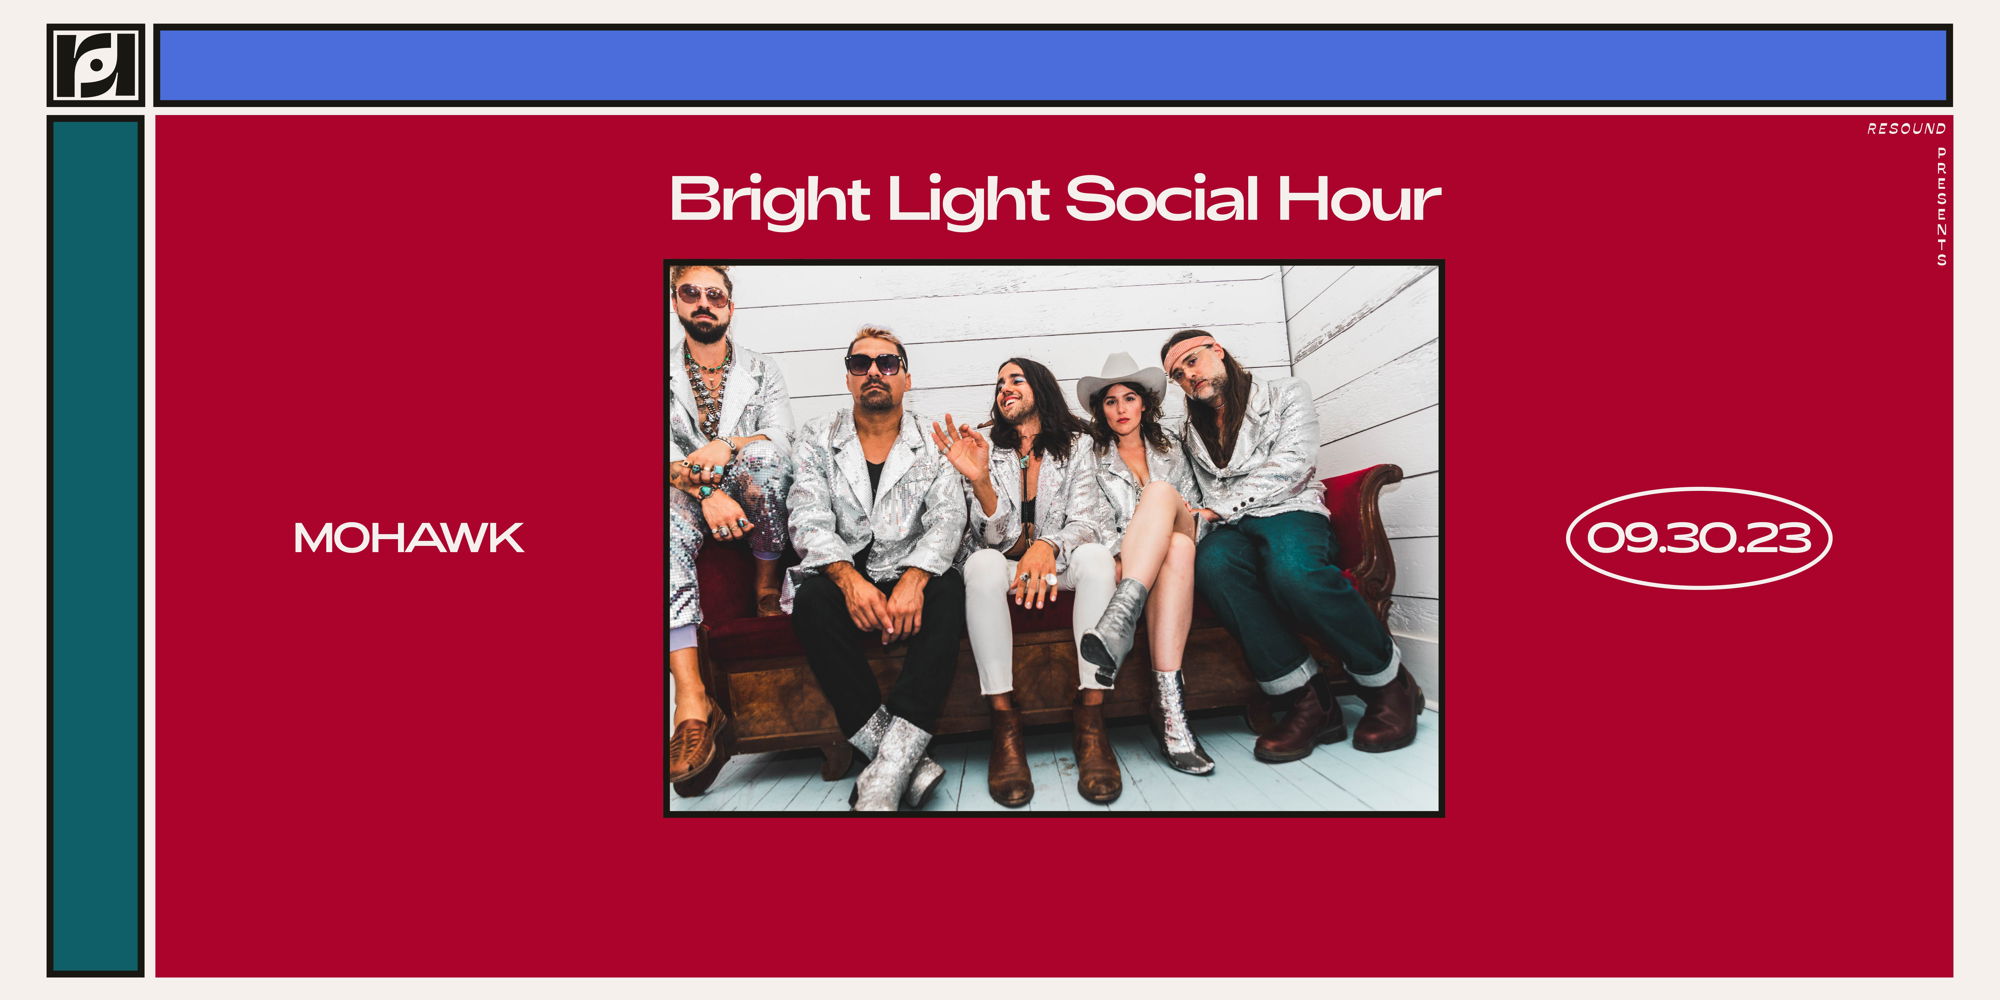 Bright Light Social Hour At Mohawk 9/30 promotional image